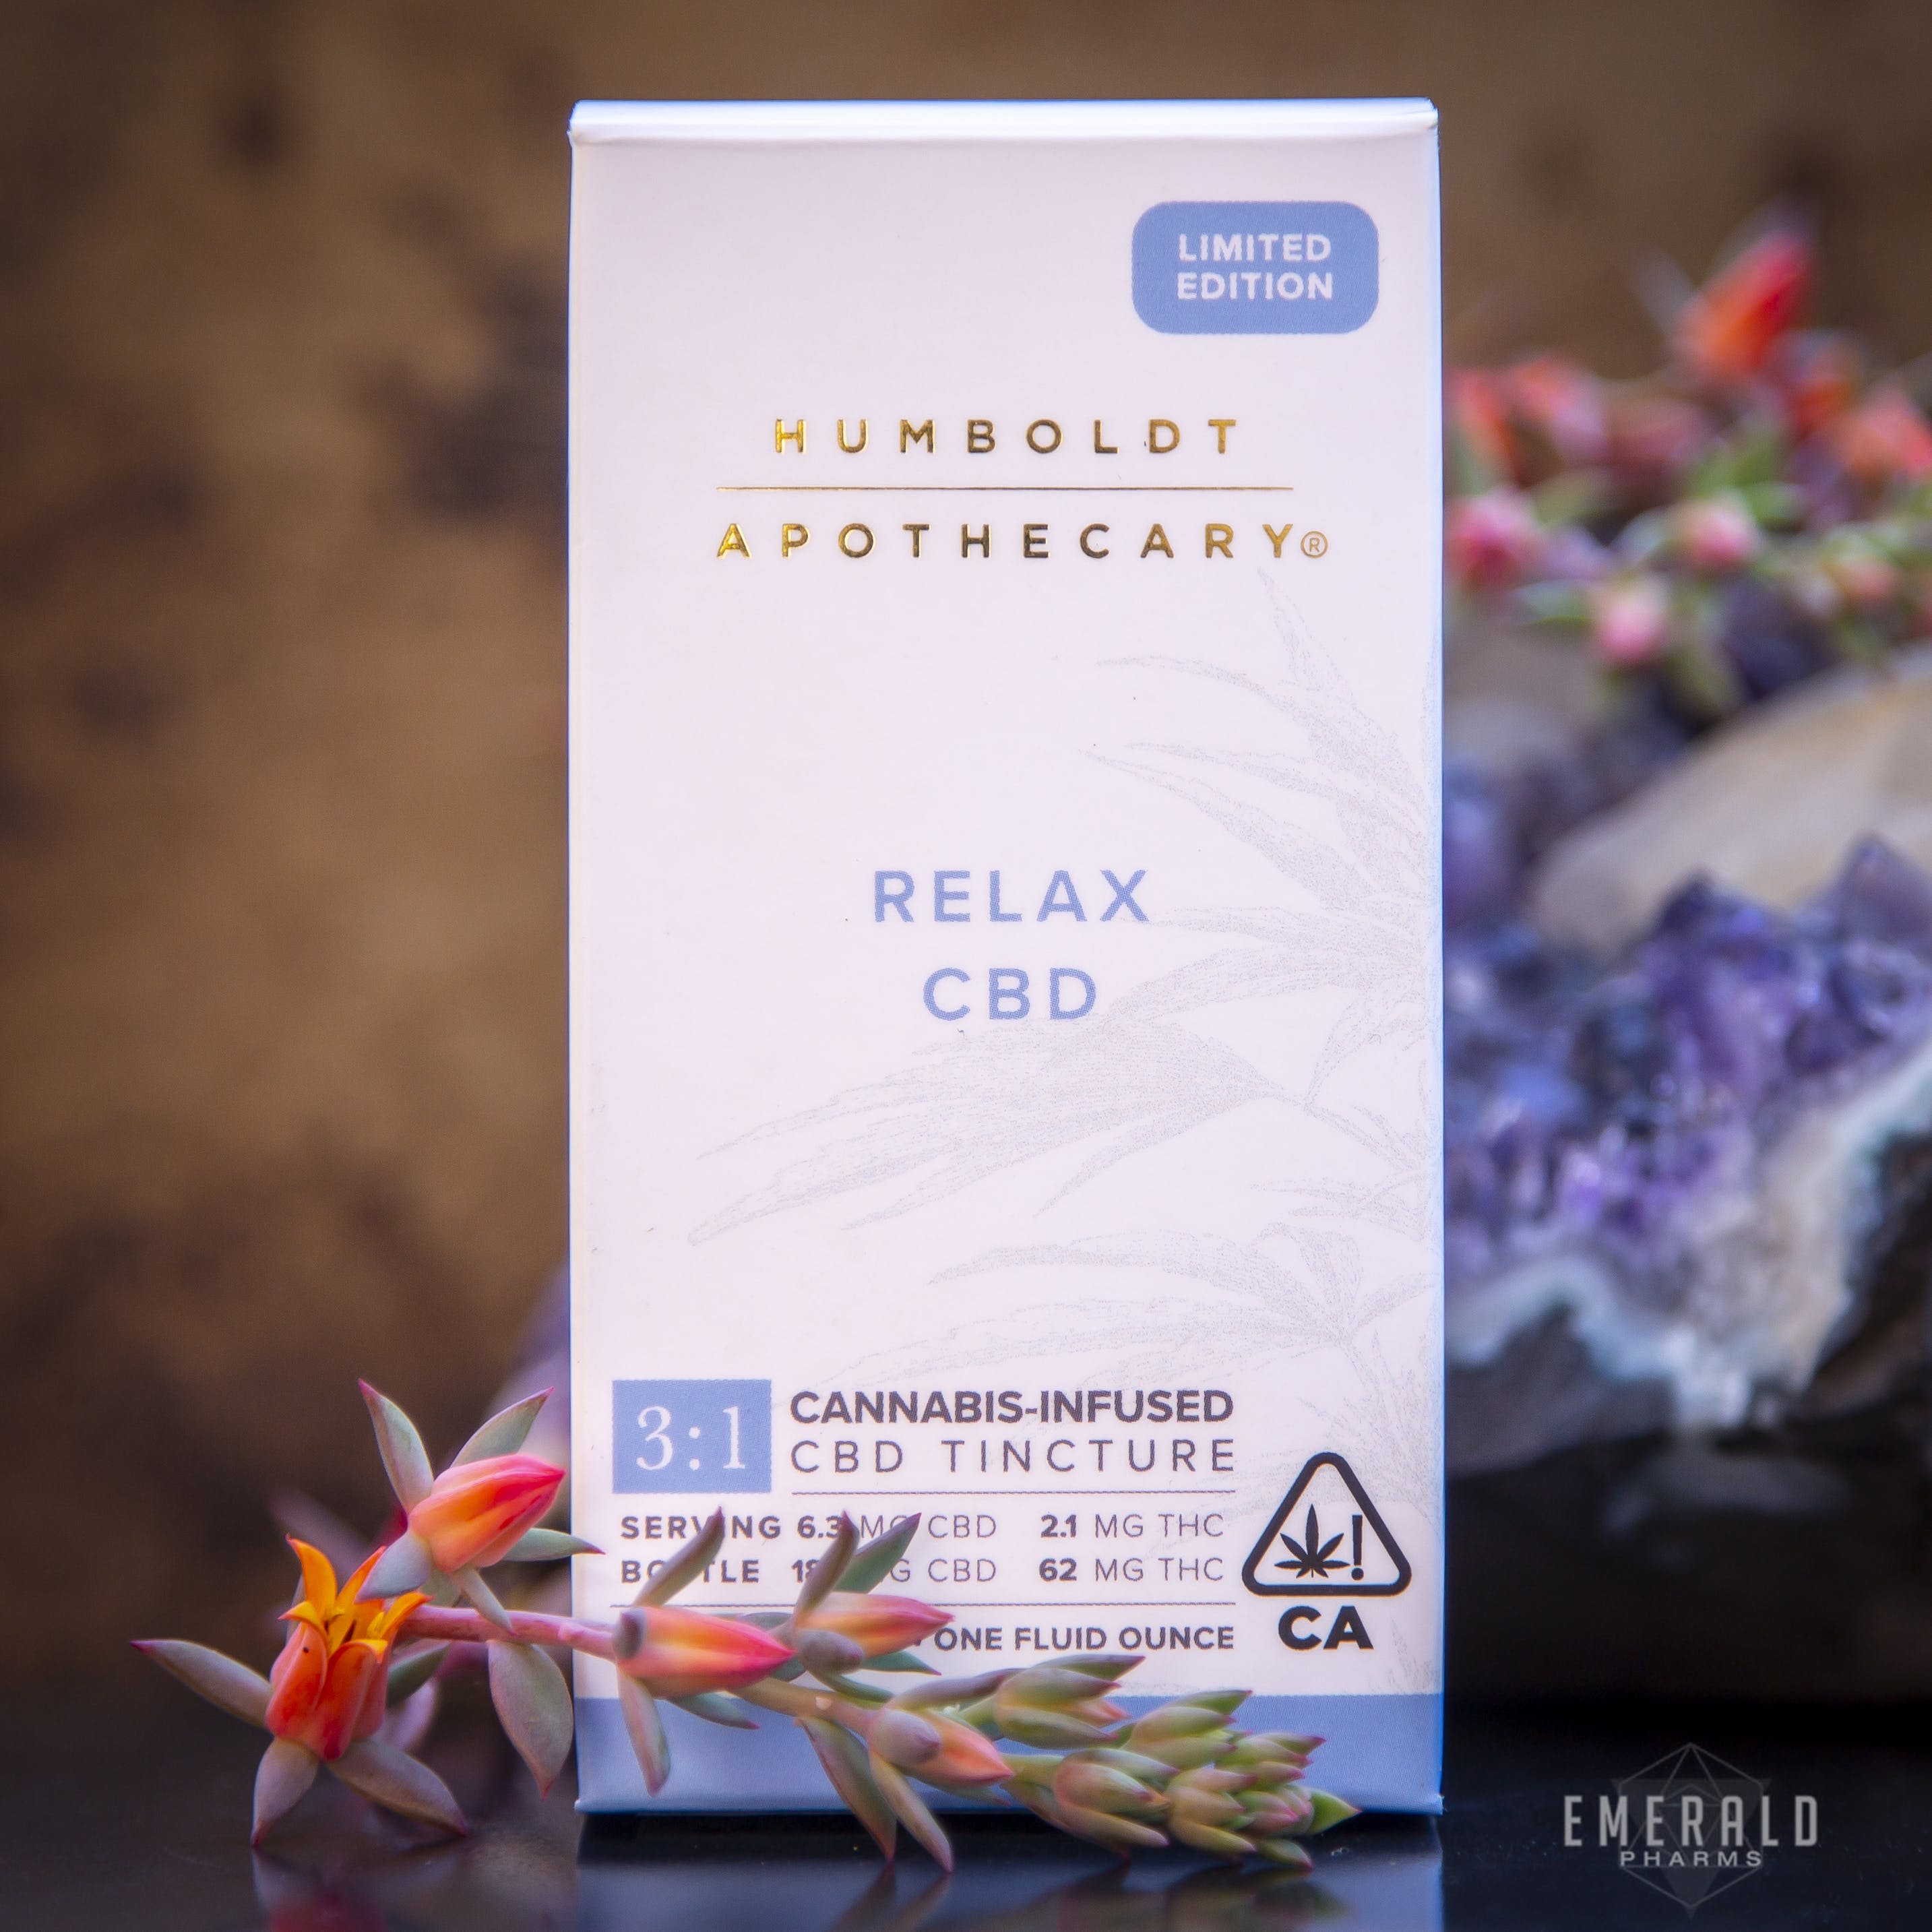 Relax: Limited Edition by Humboldt Apothecary